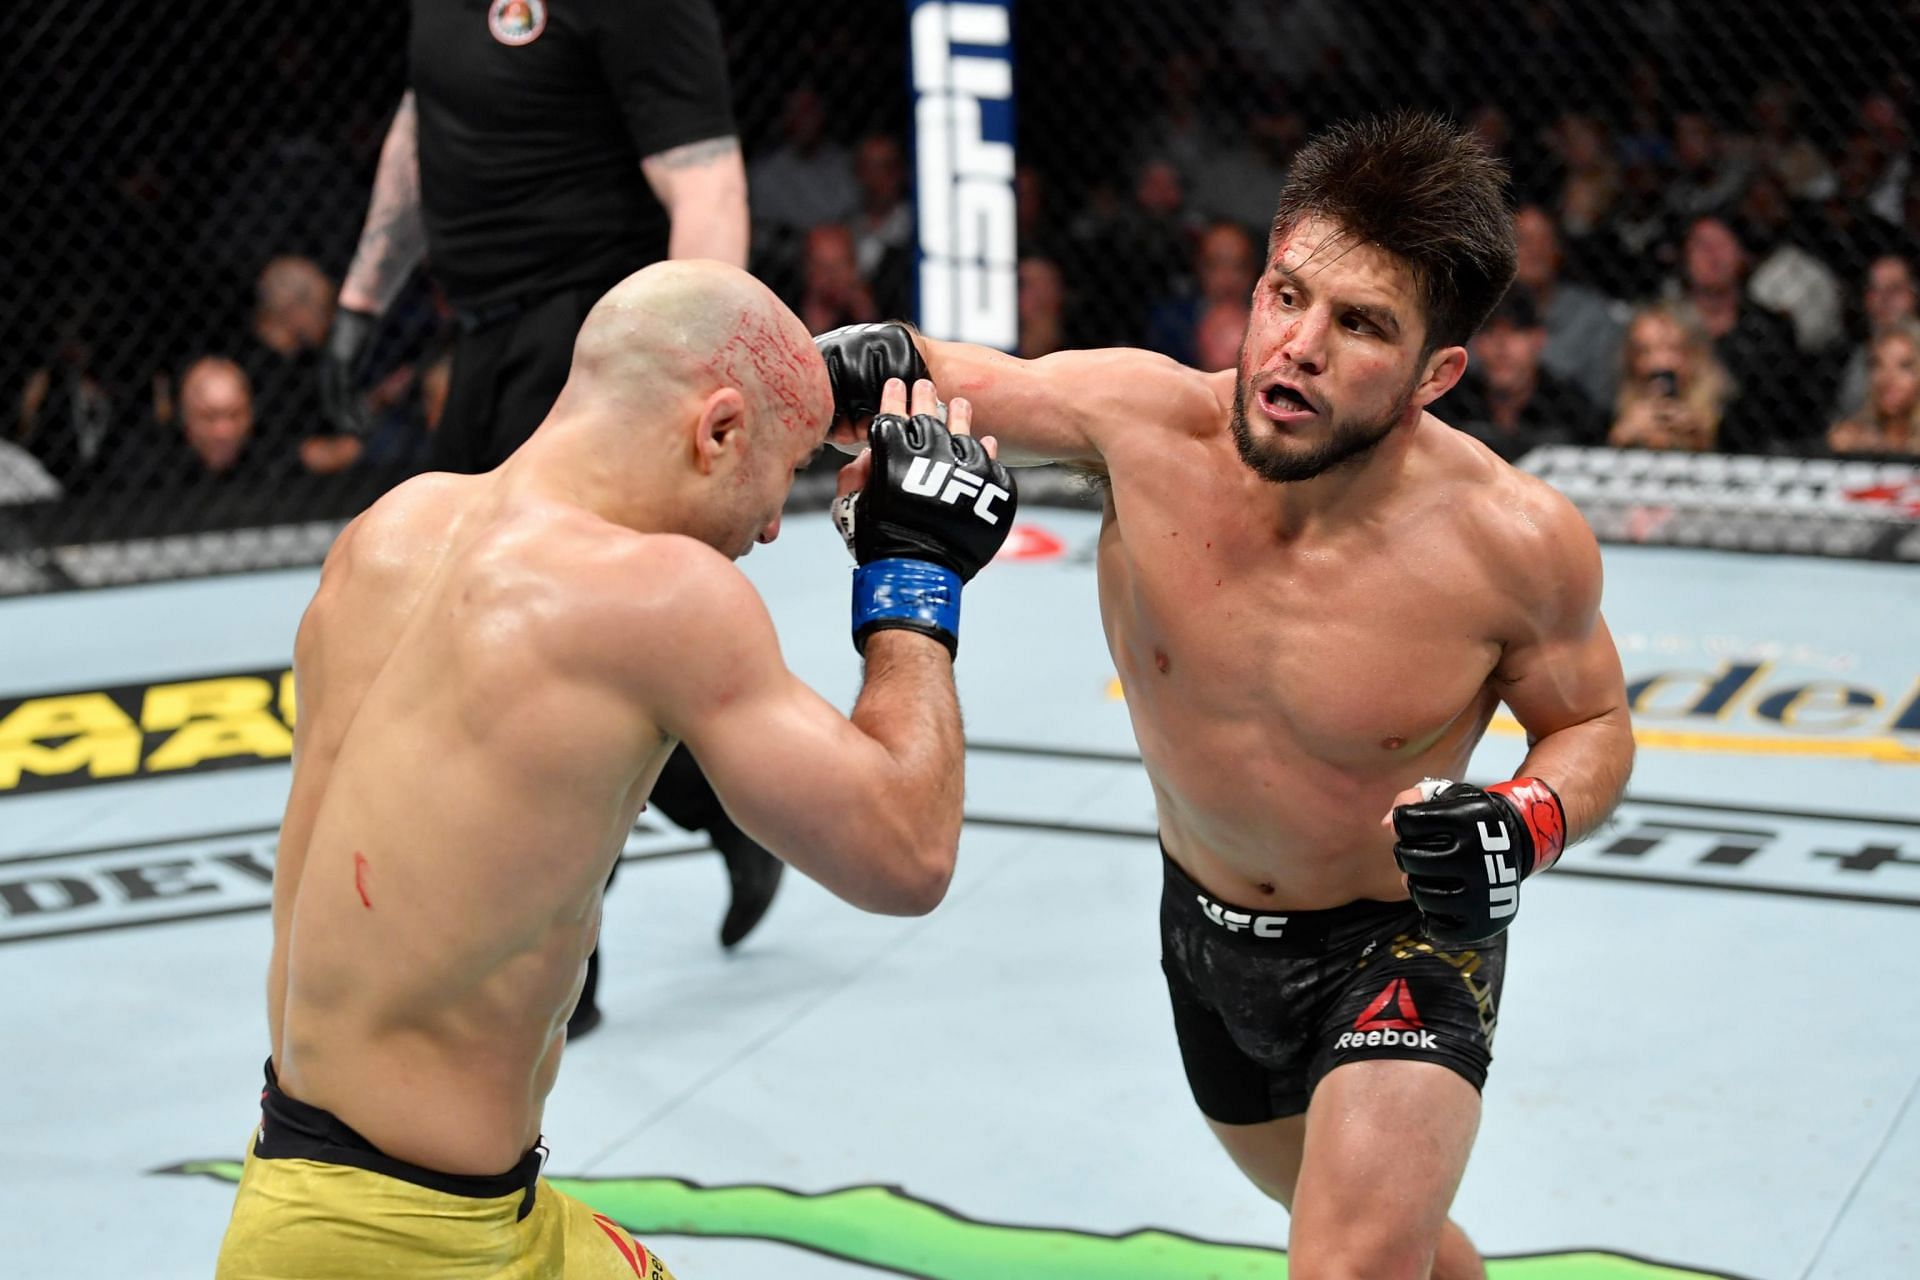 Henry Cejudo never actually lost his bantamweight title in the octagon